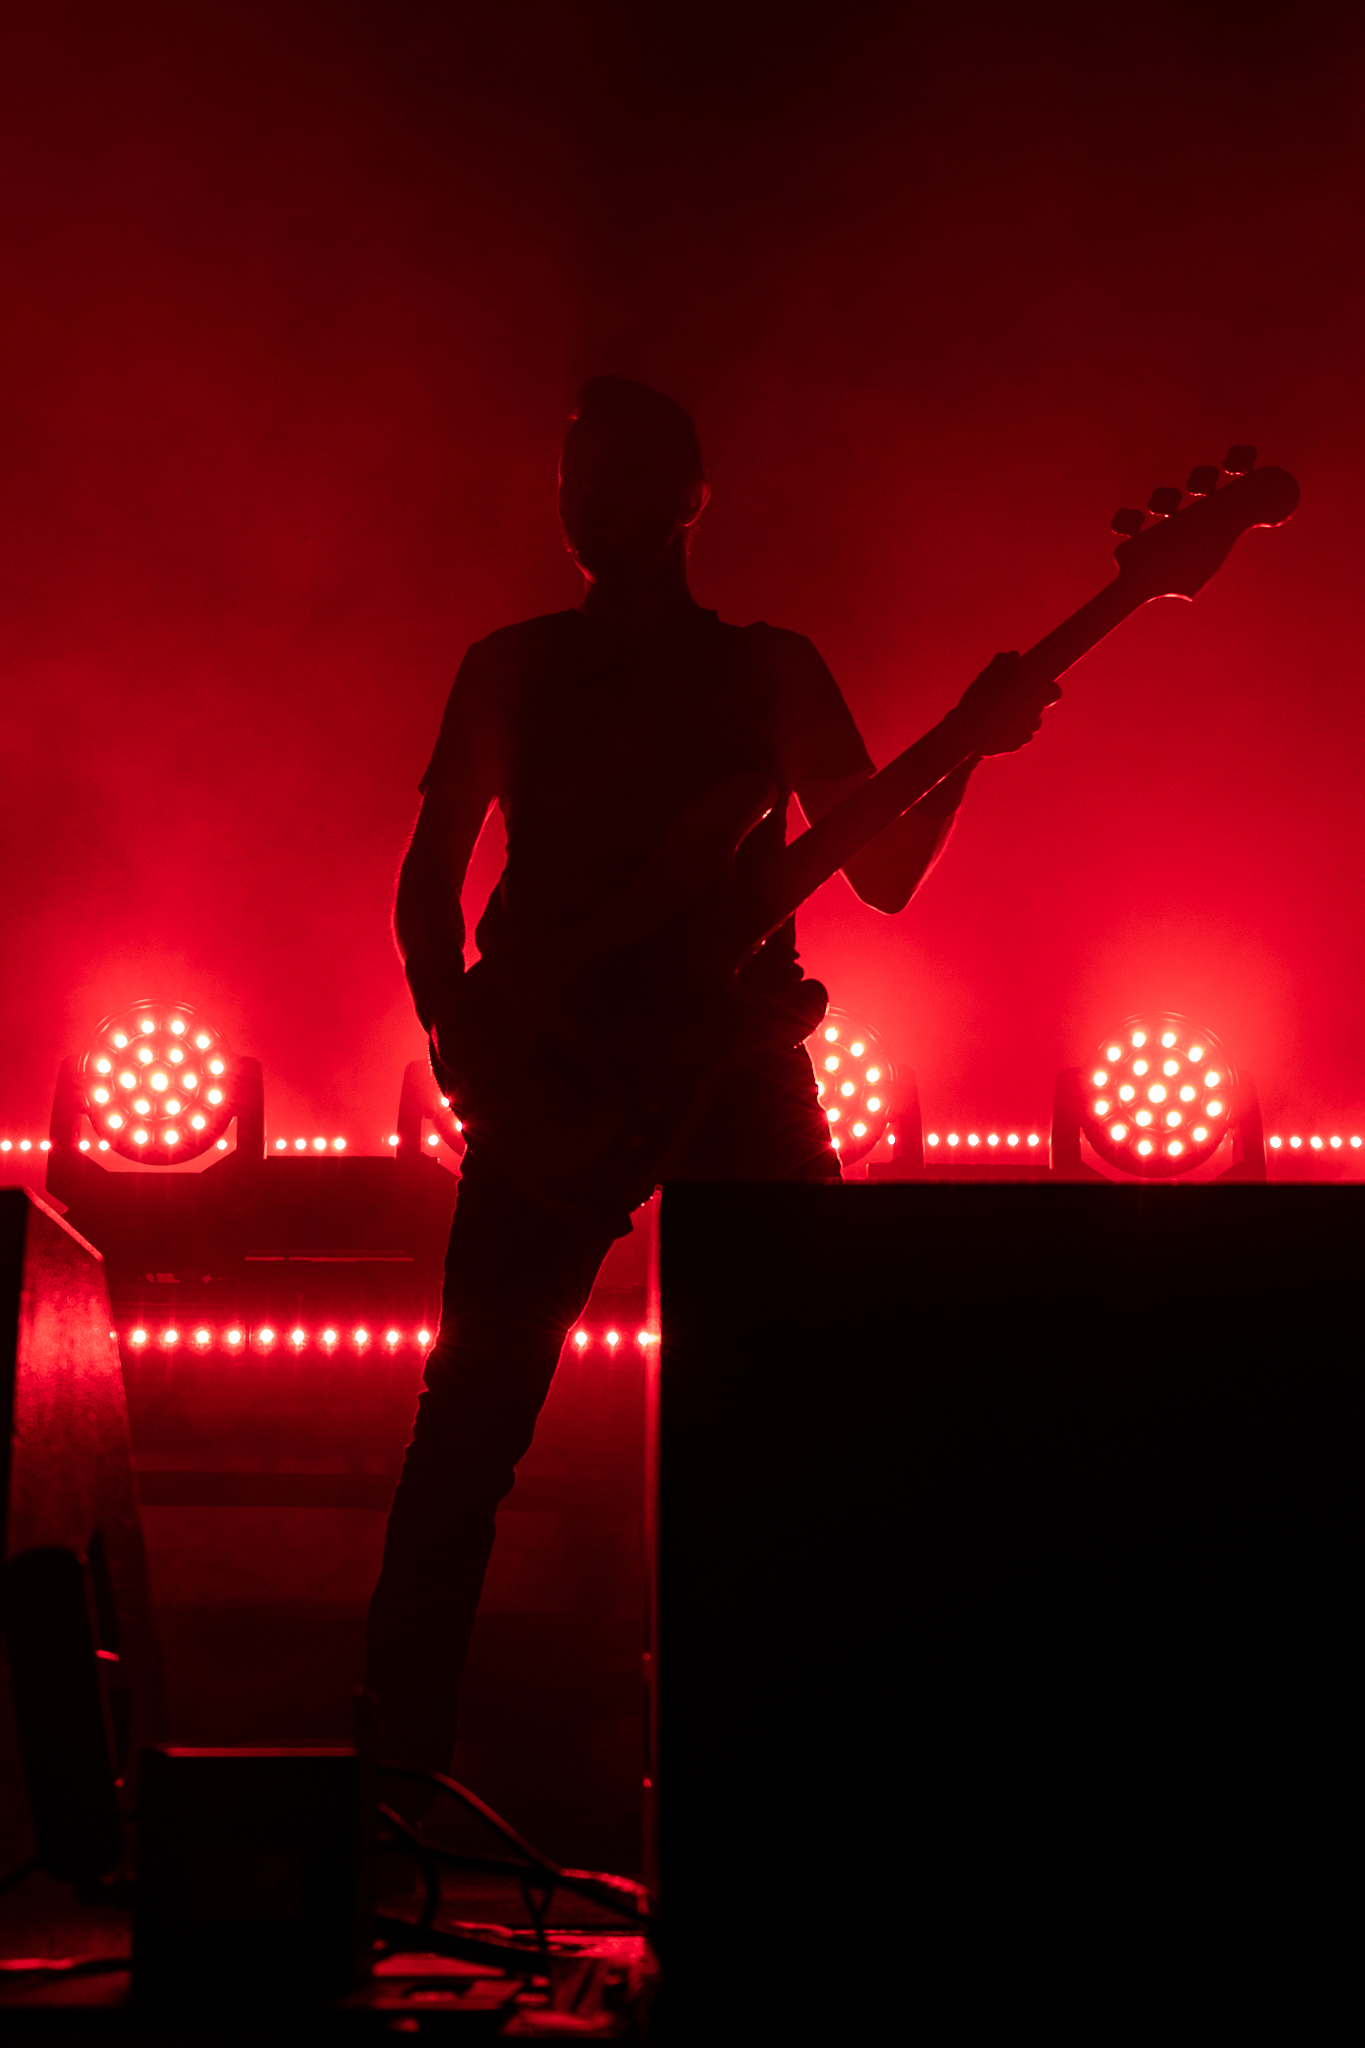 Gojira perform at Moda Center Theater of the Clouds in Portland, OR on April 14, 2022.